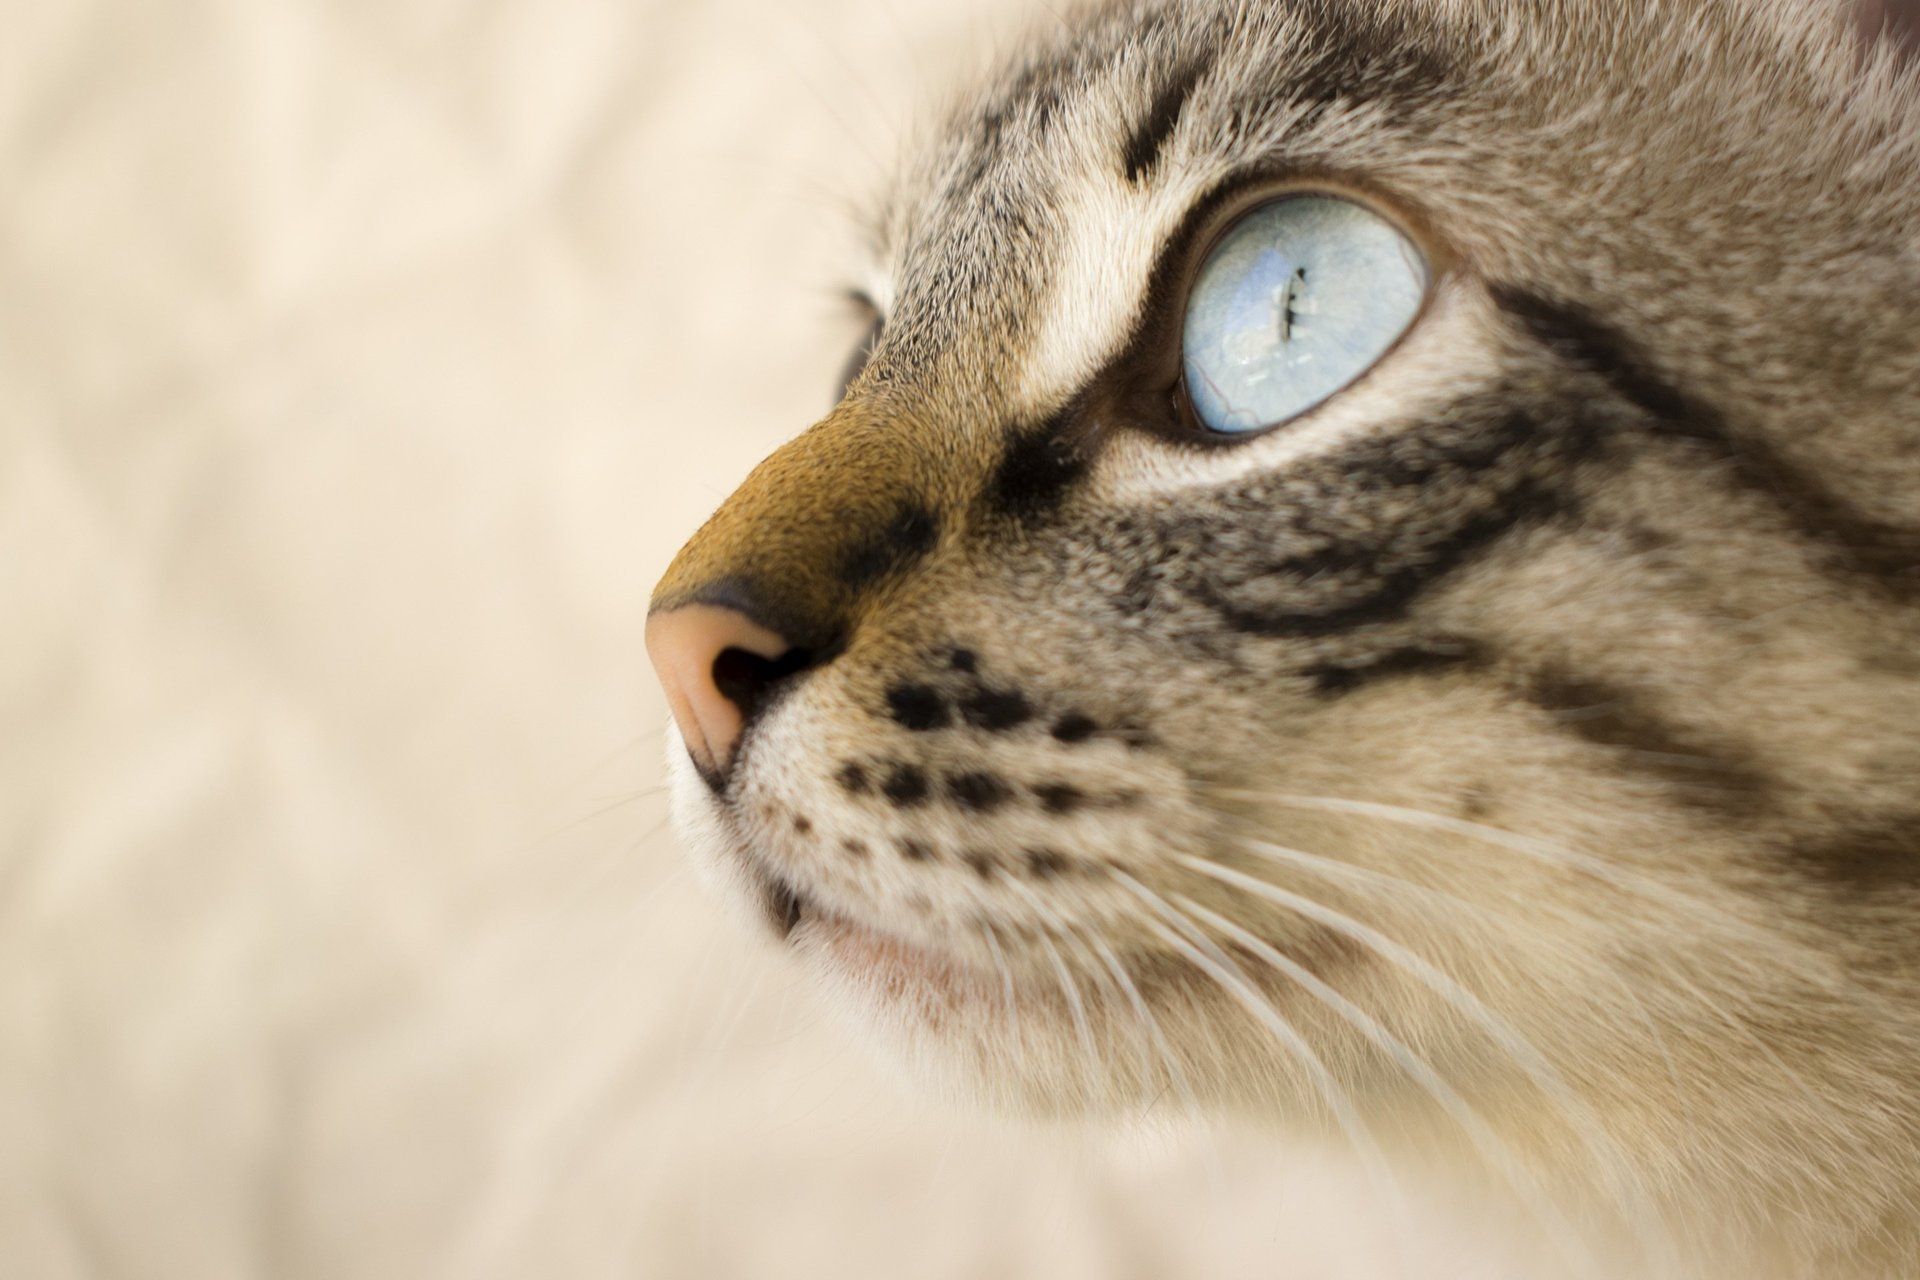 Certain insecticides are toxic to cats